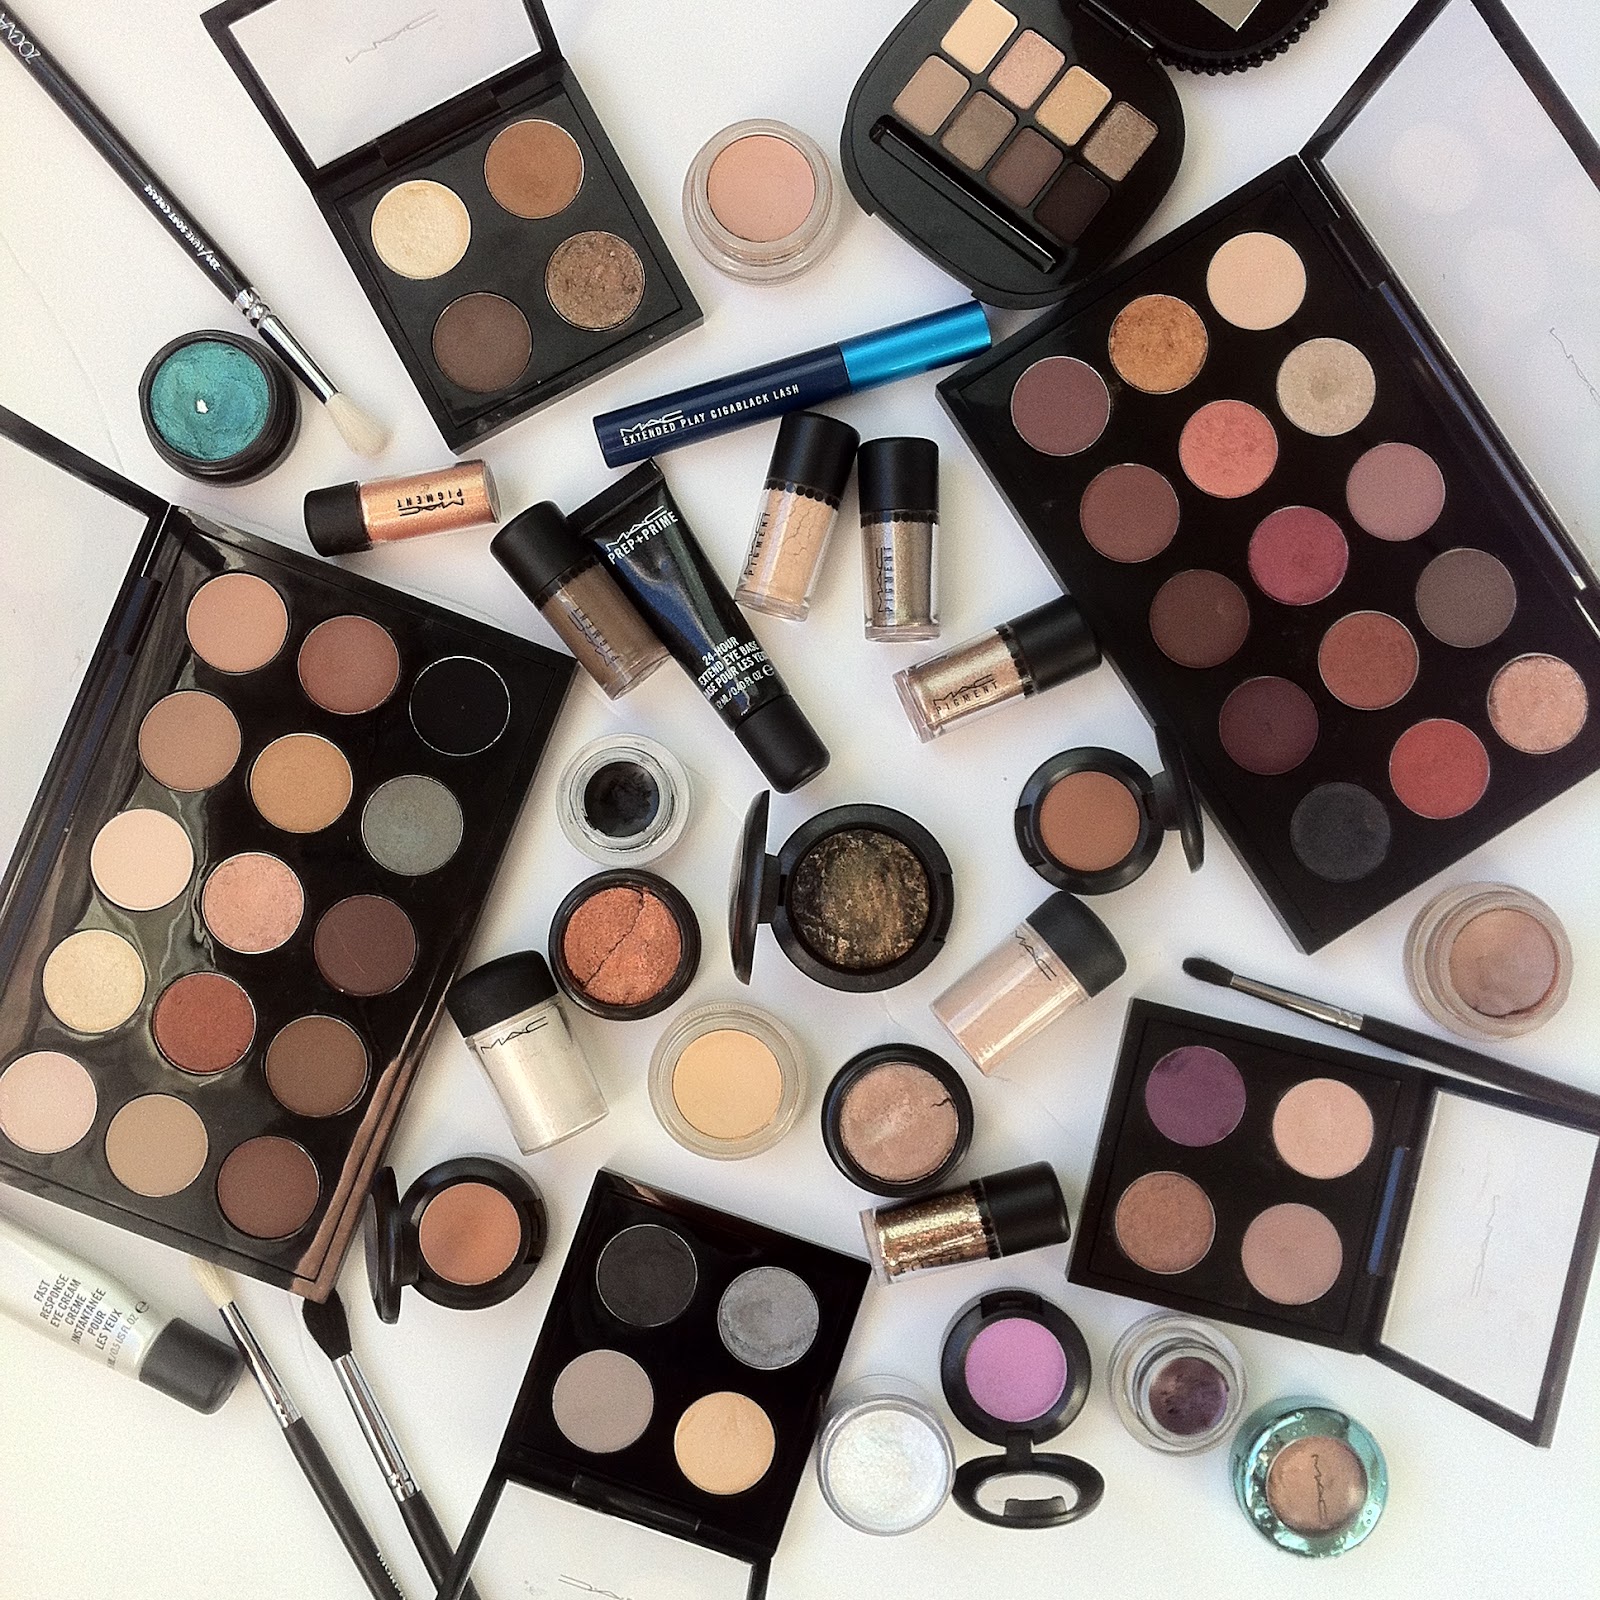 NADM: How to Build Own MAC Palette - Eyeshadows For Brown Eyes